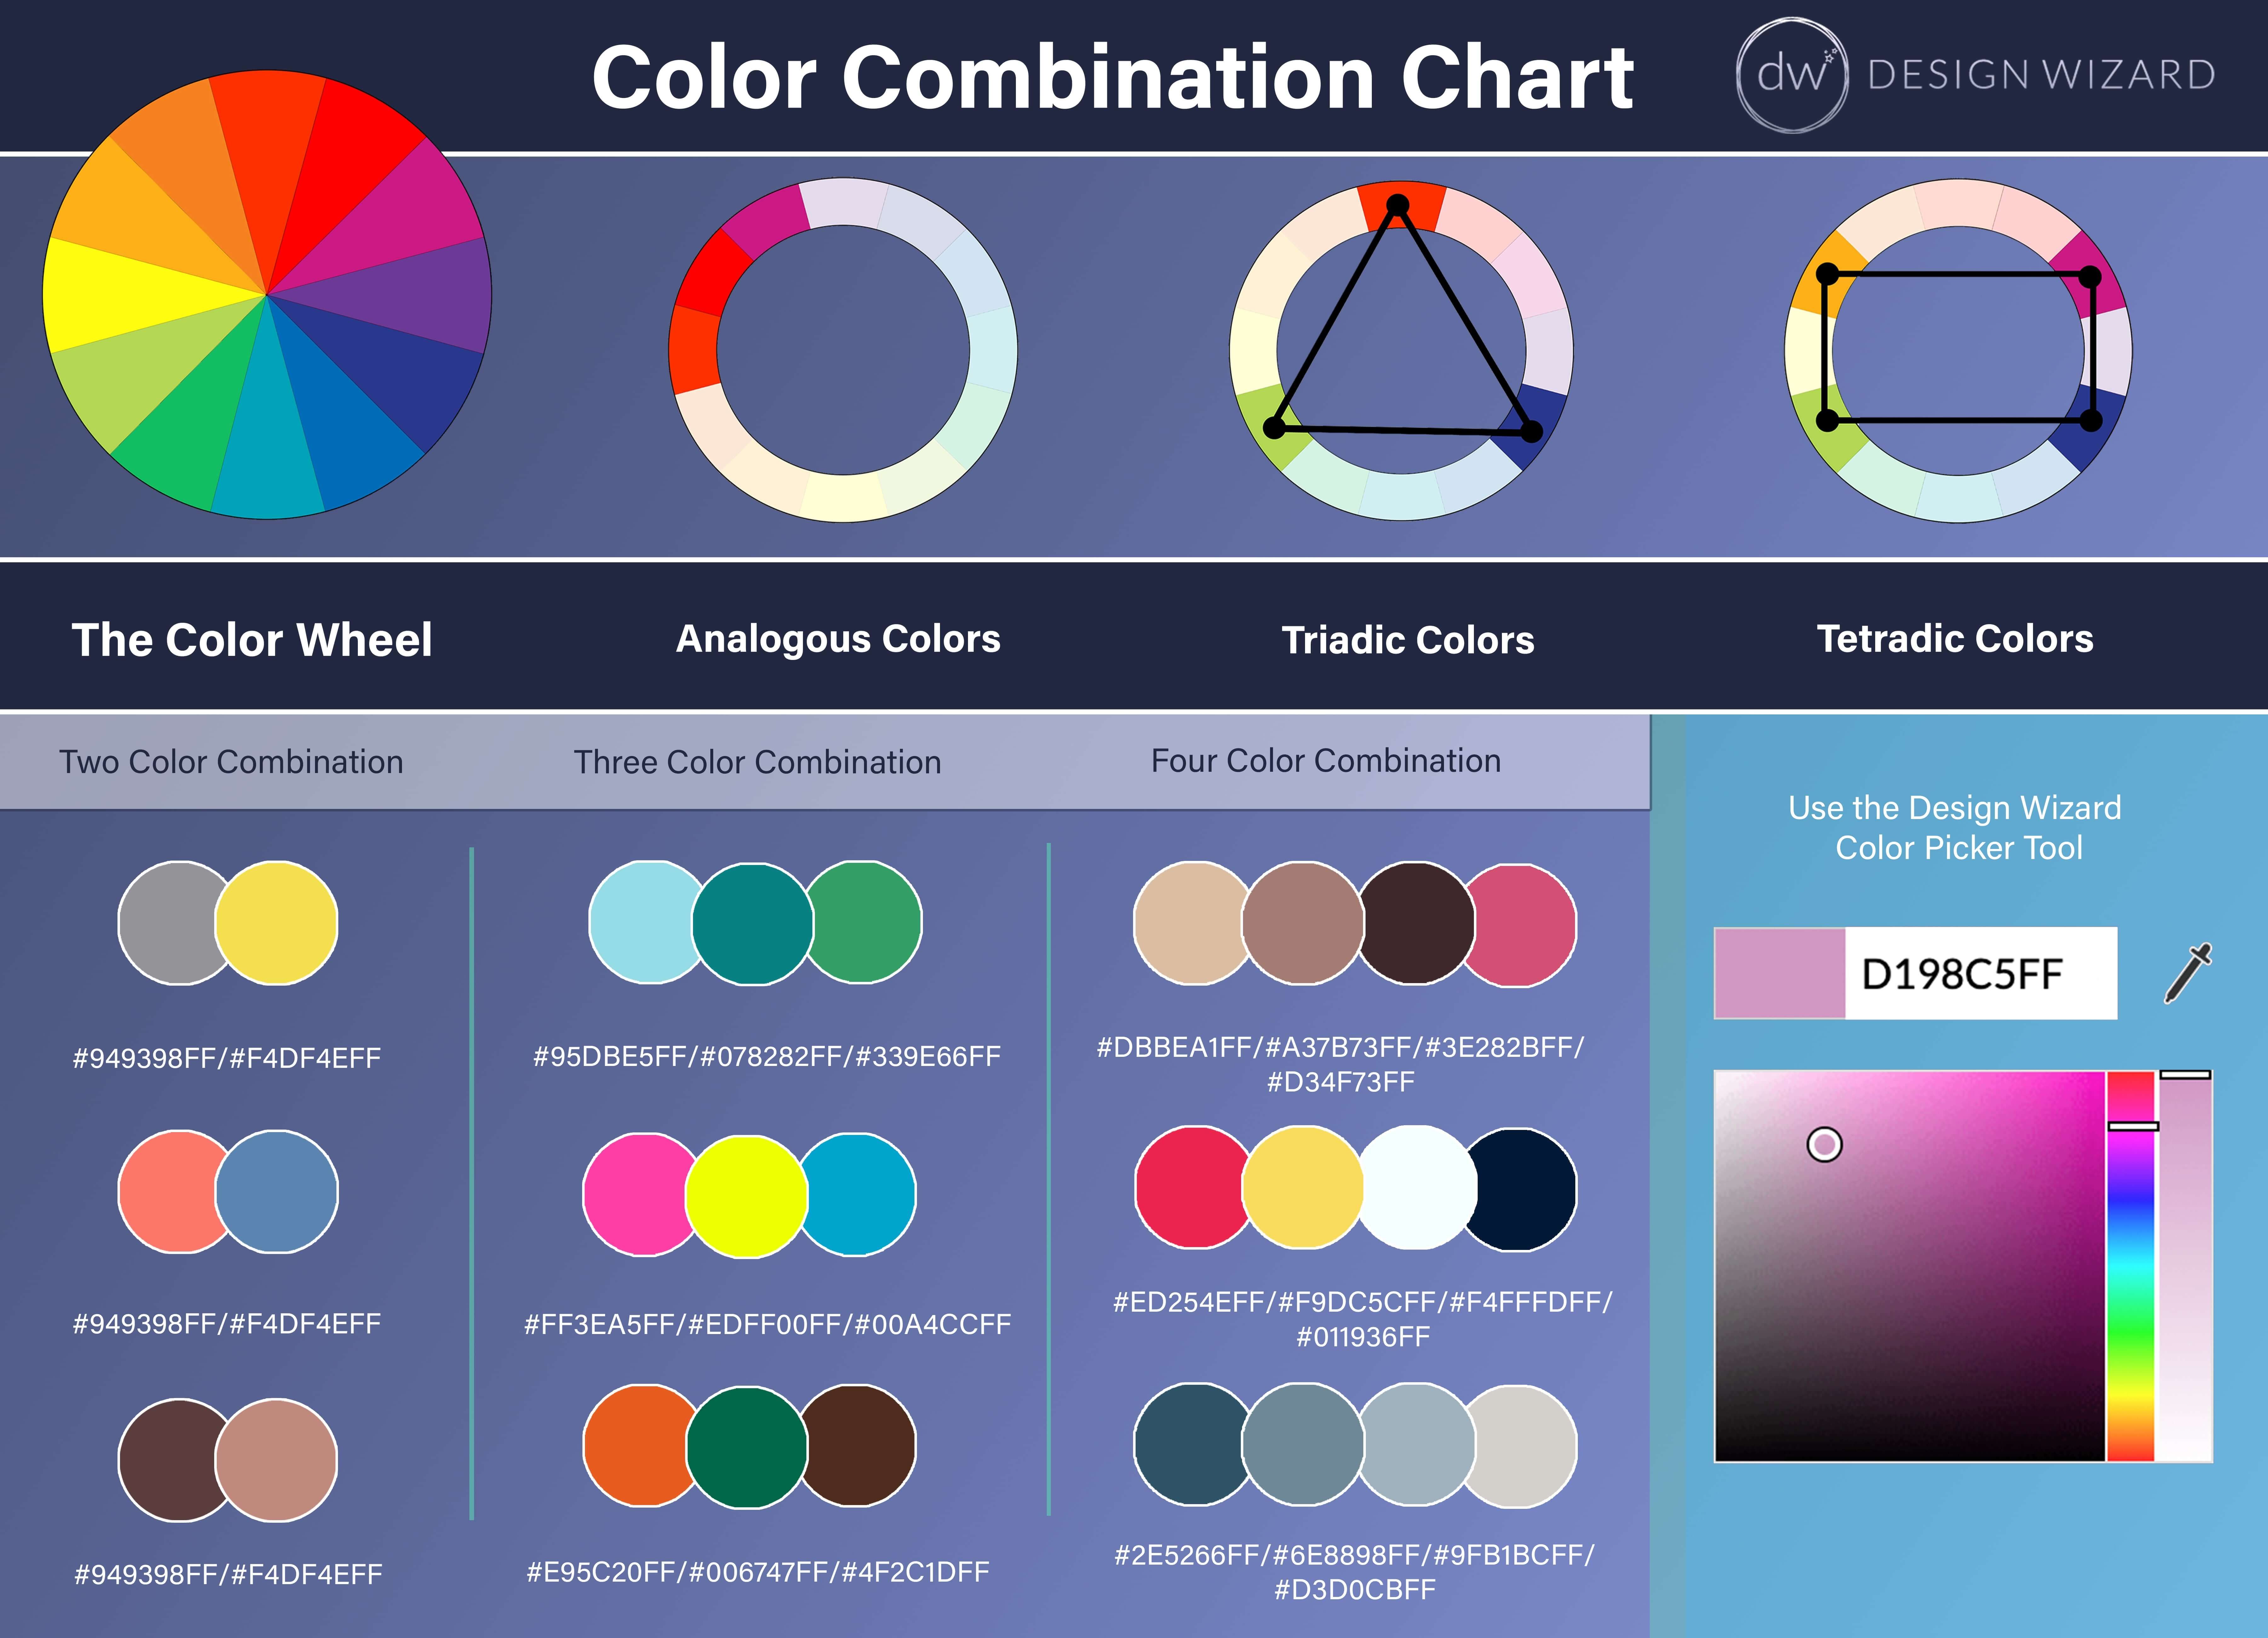 Color Combination Chart - 80 attractive color combinations to try - Image